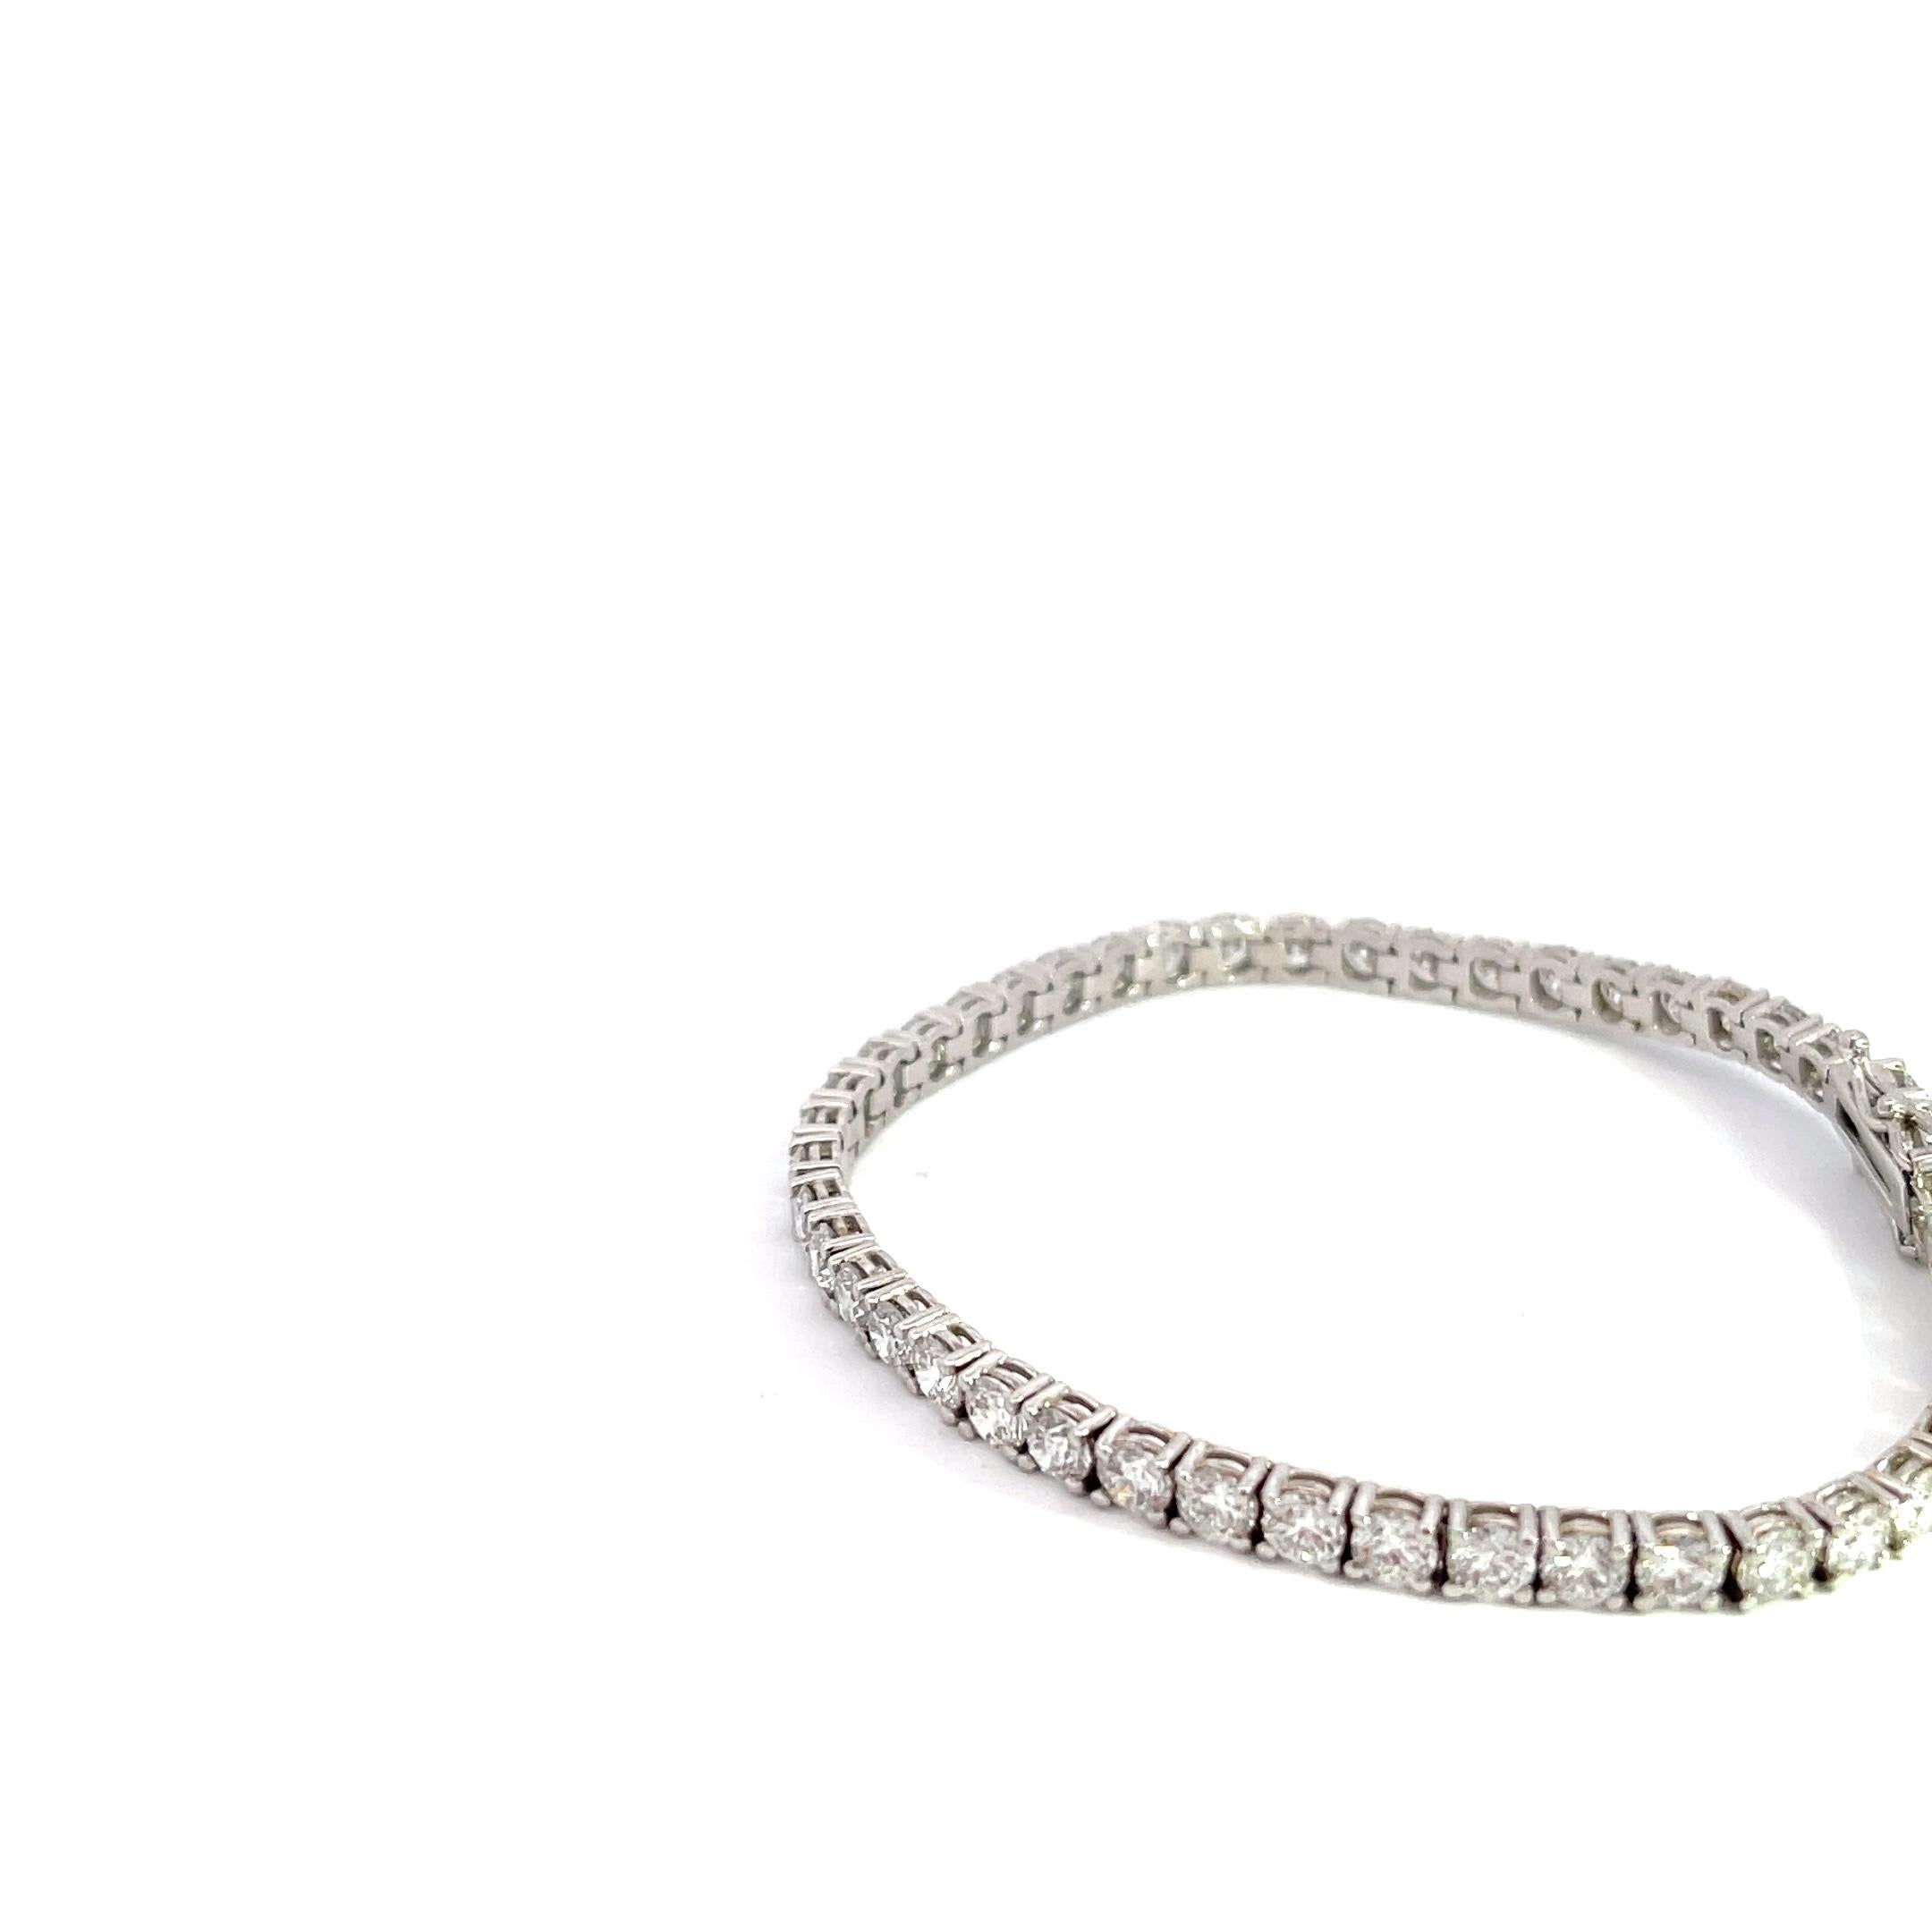 Introducing the exquisite 14k White Gold 9 1/2ctw Diamond Tennis Bracelet, a true symbol of timeless elegance and sophistication. This dazzling masterpiece is a must-have for those seeking to make a stunning statement. Crafted with meticulous